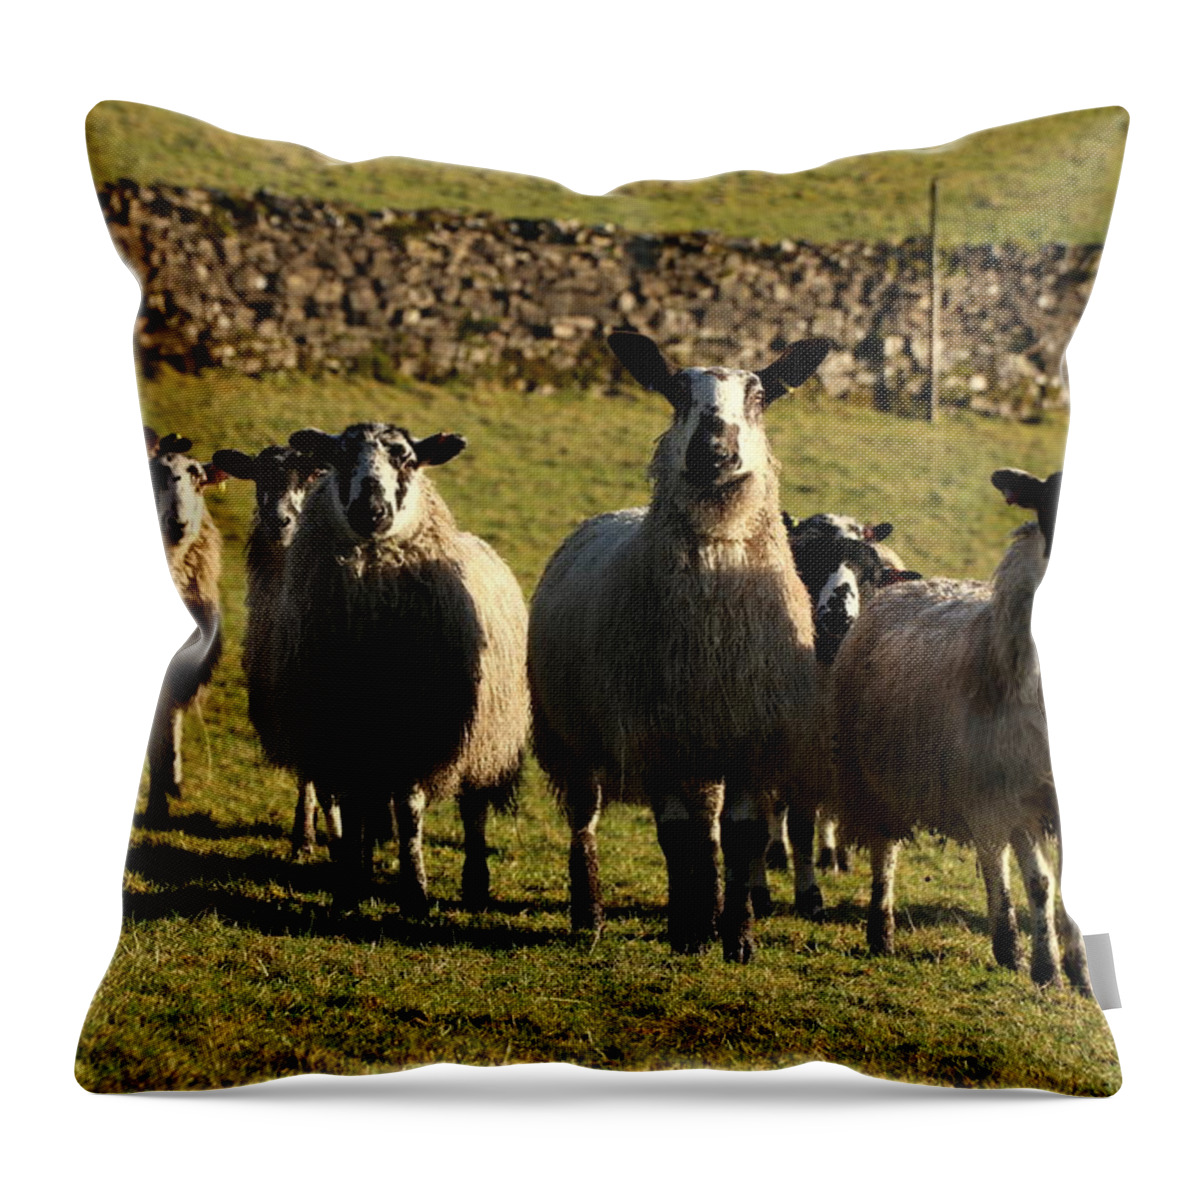 Sheep Throw Pillow featuring the photograph King of the sheep by Lukasz Ryszka